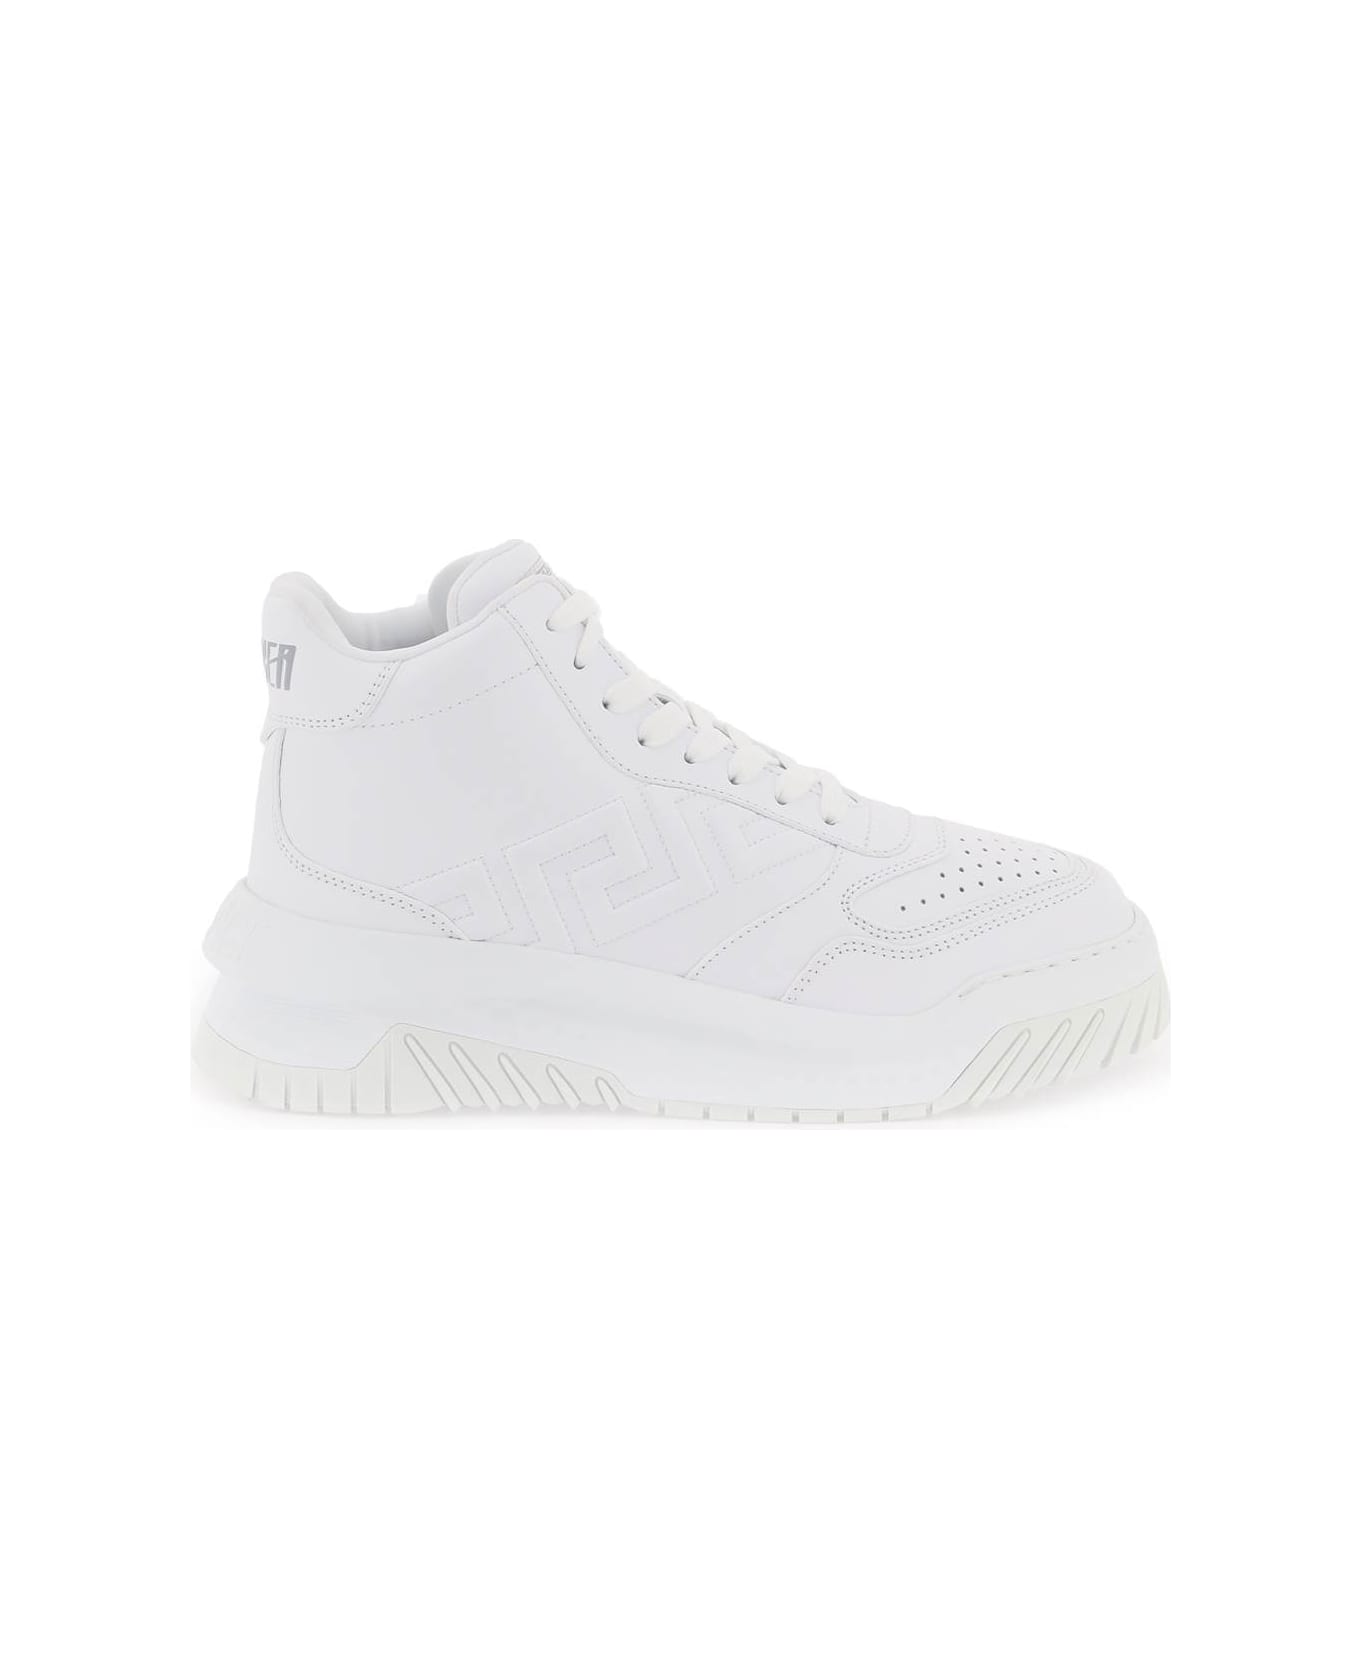 Versace 'greca Odissea' High Sneakers In White Calf Leather - OPTICAL WHITE (White) スニーカー